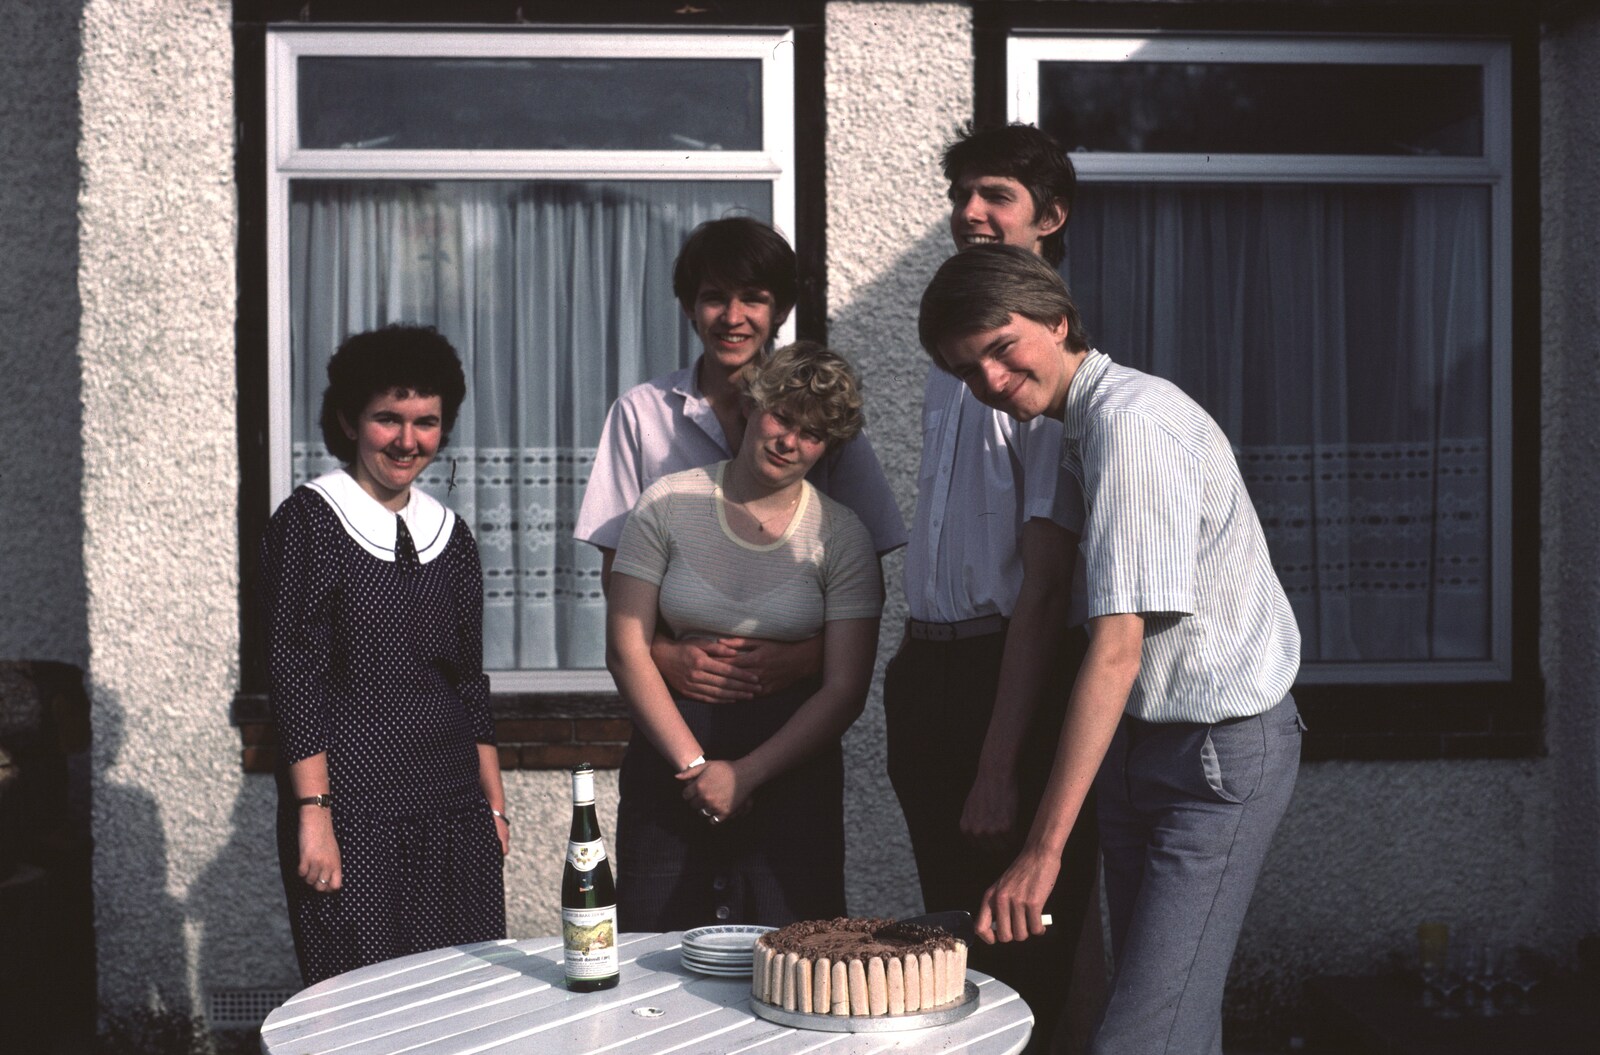 Nosher cuts his birthday cake from Nosher's 18th pre-Birthday and College Miscellany, Sway and Brockenhurst - 22nd May 1985